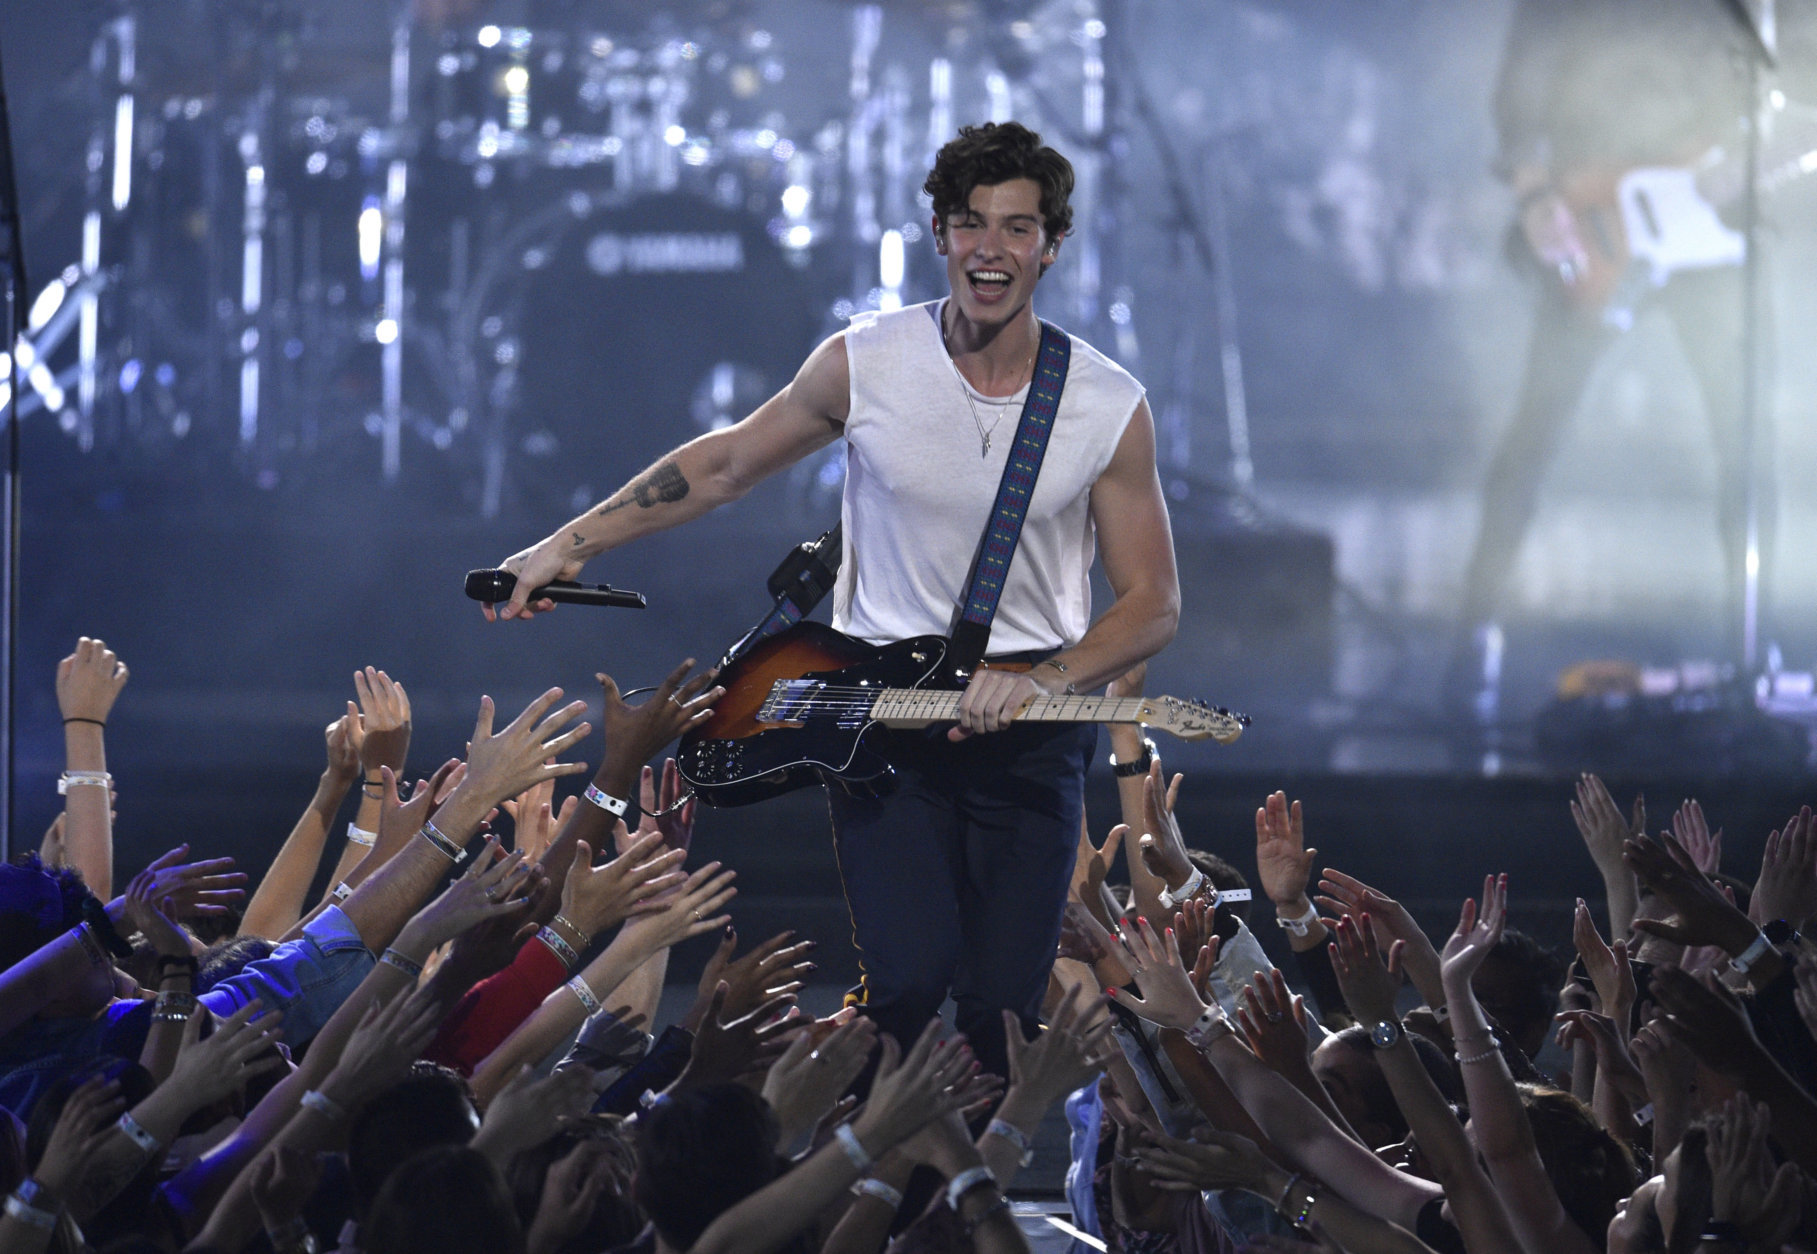 Shawn Mendes performs "In My Blood" onstage at the MTV Video Music Awards at Radio City Music Hall on Monday, Aug. 20, 2018, in New York. (Photo by Chris Pizzello/Invision/AP)